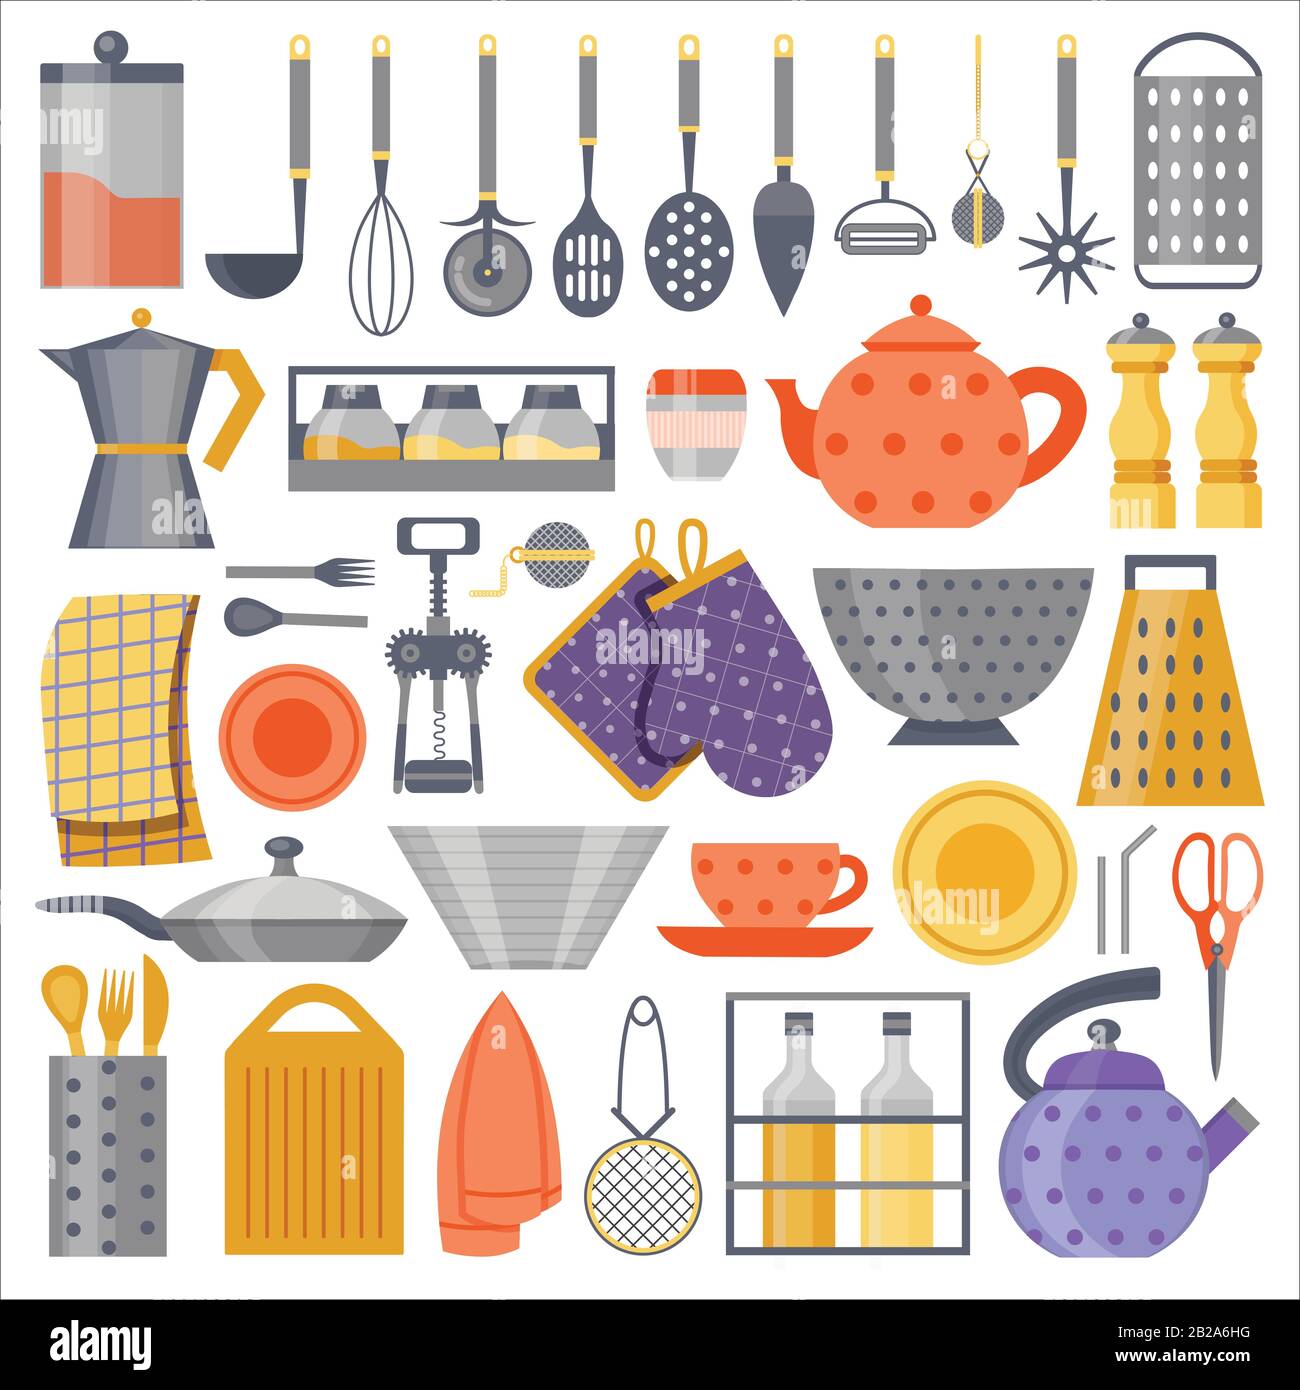 Kitchenware and Cooking Tool Flat Elements Set Stock Vector